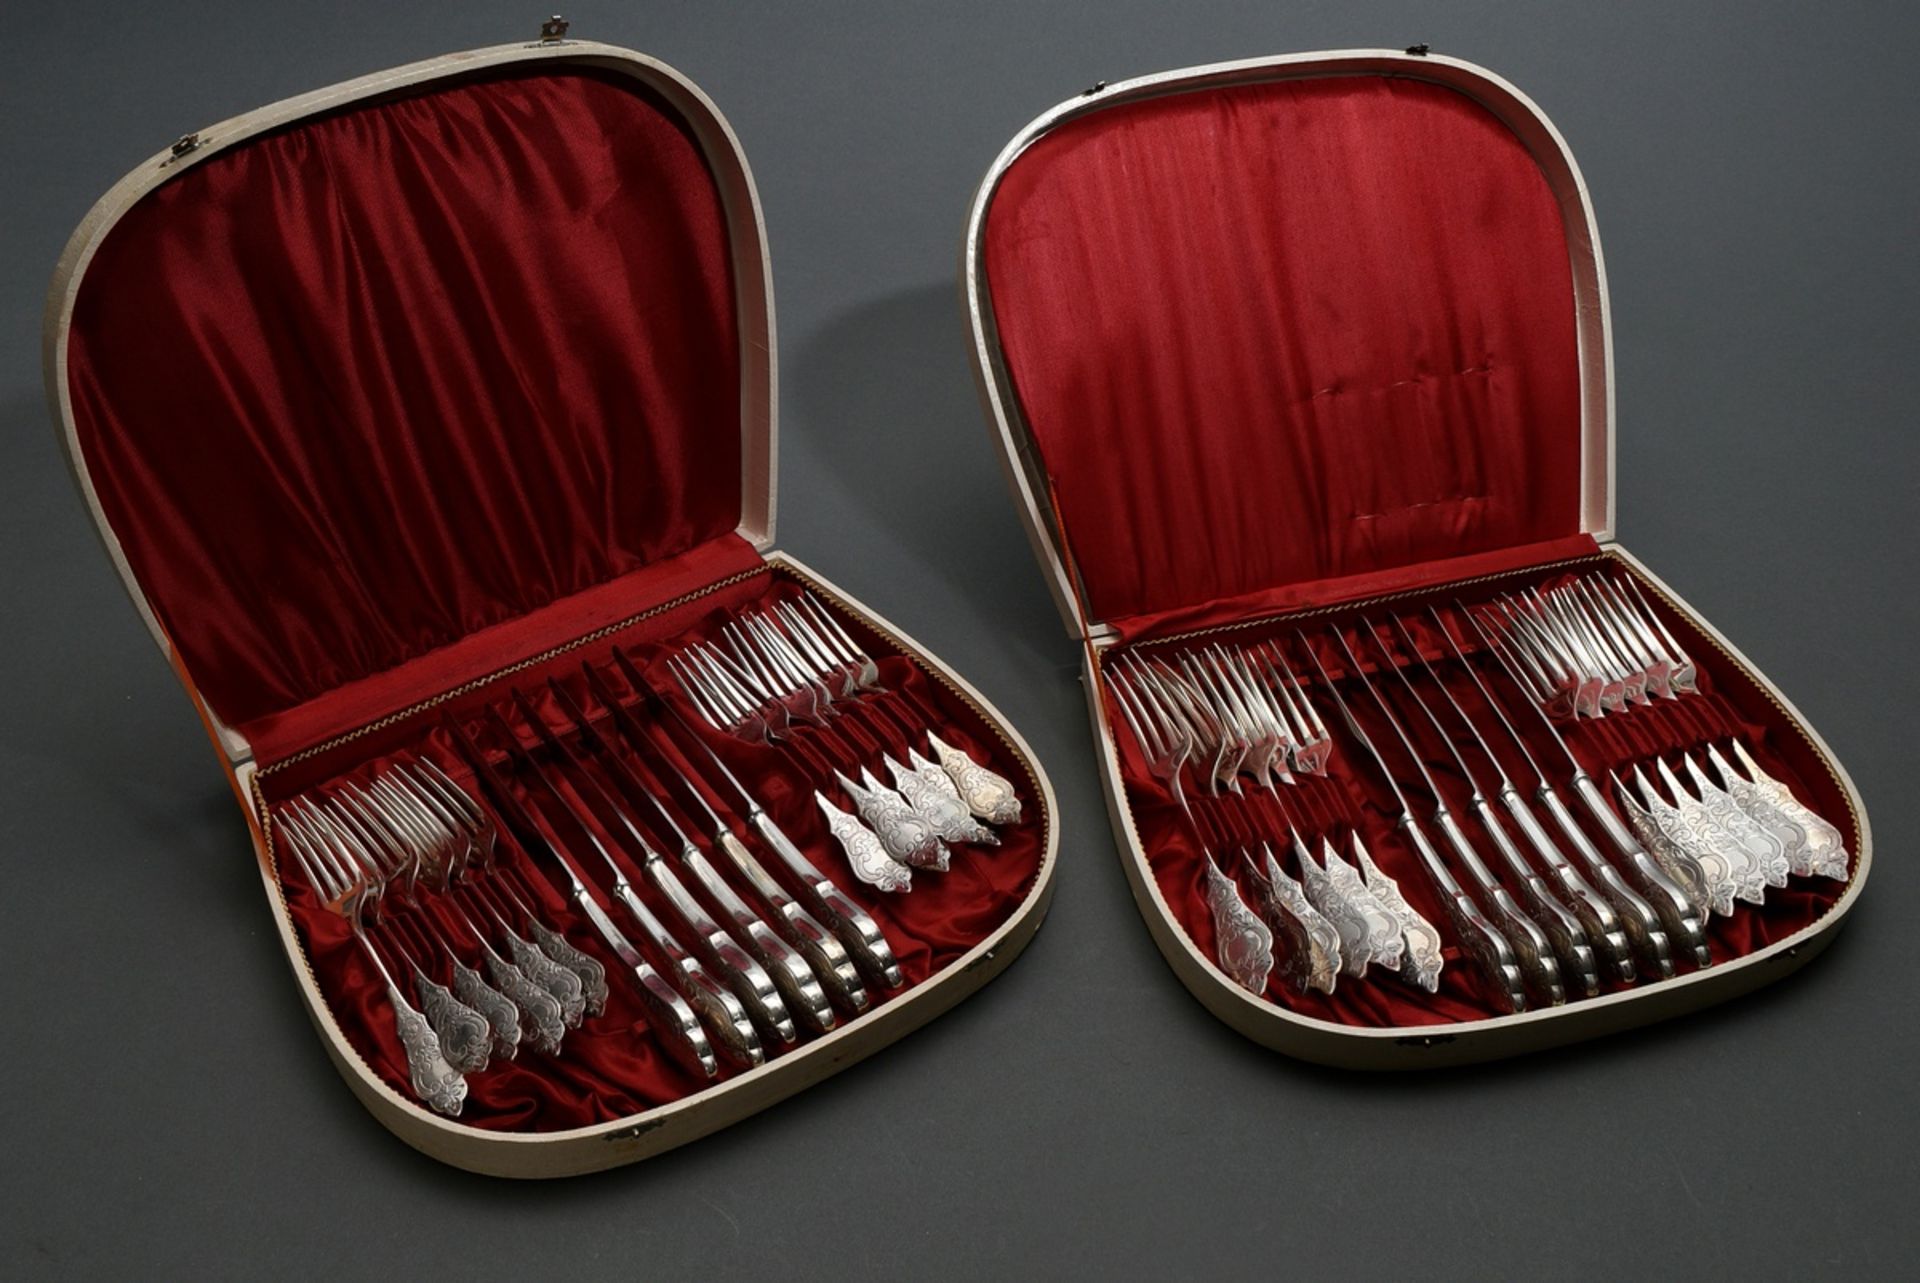 118 pieces Robbe & Berking cutlery ‘Ostfriesenmuster’, silver 800, 2182g (without knives), consisti - Image 8 of 12